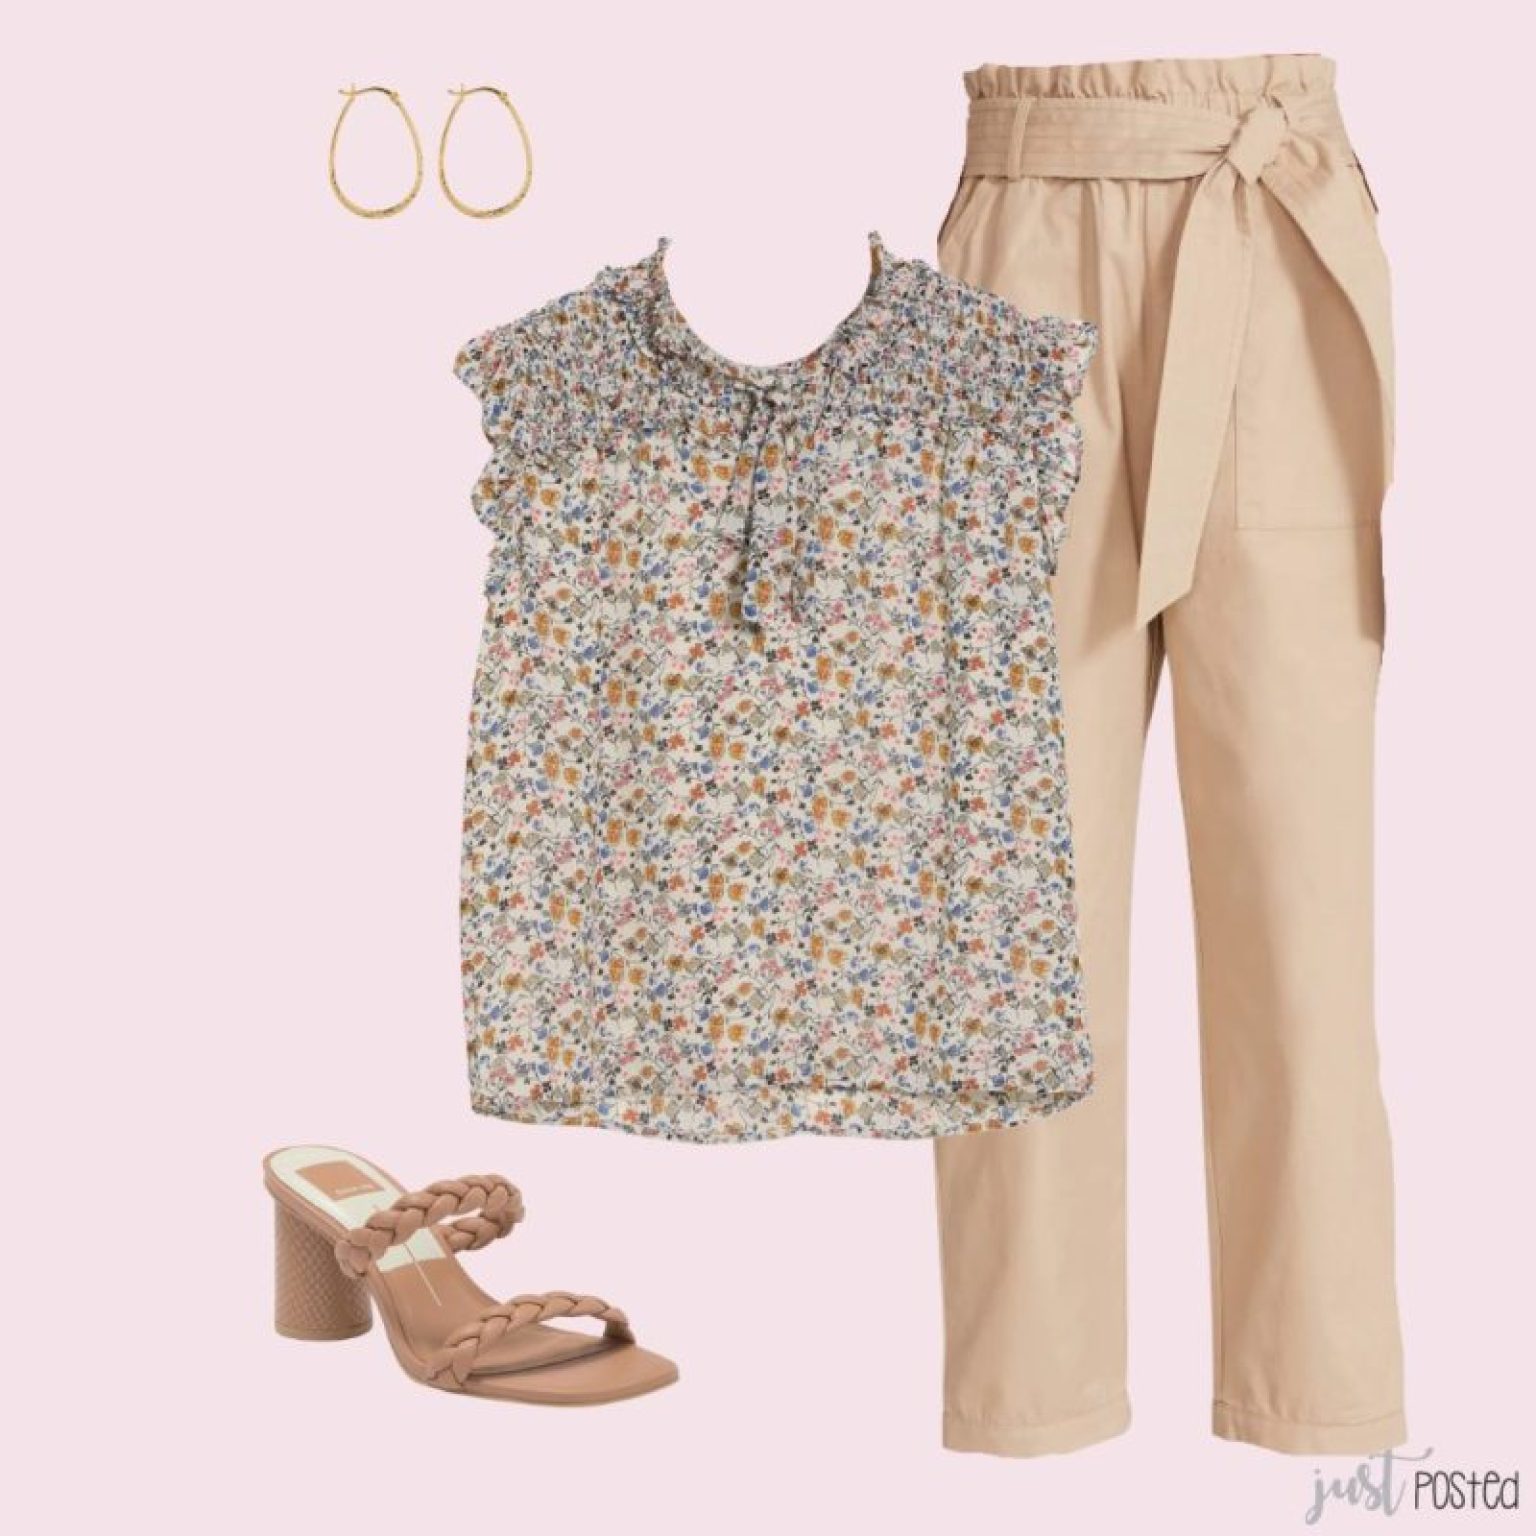 20 Looks for Teachers – Just Posted